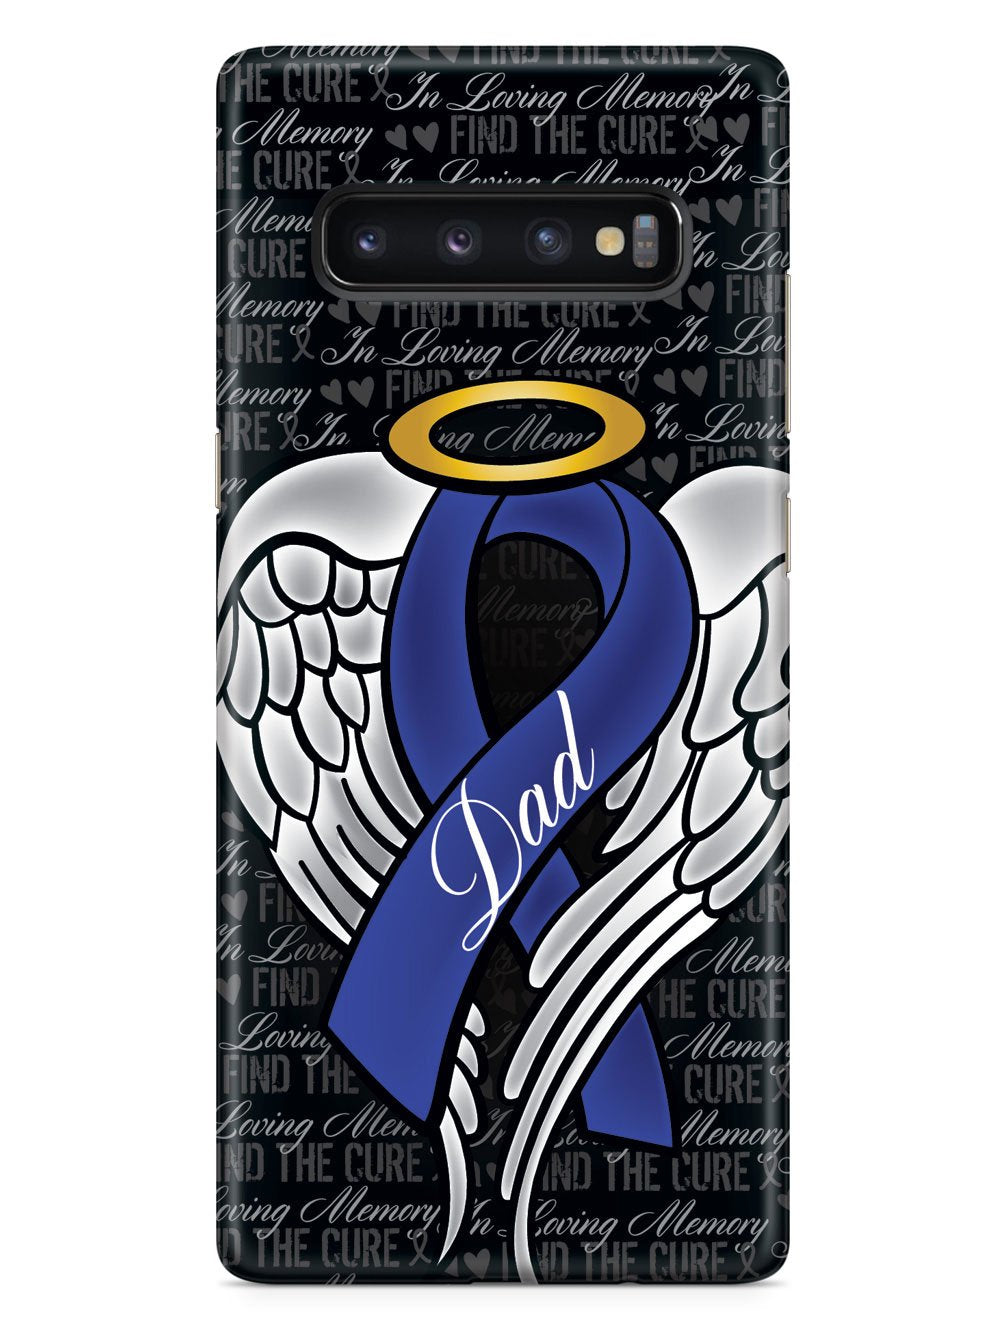 In Loving Memory of My Dad - Blue Ribbon Case